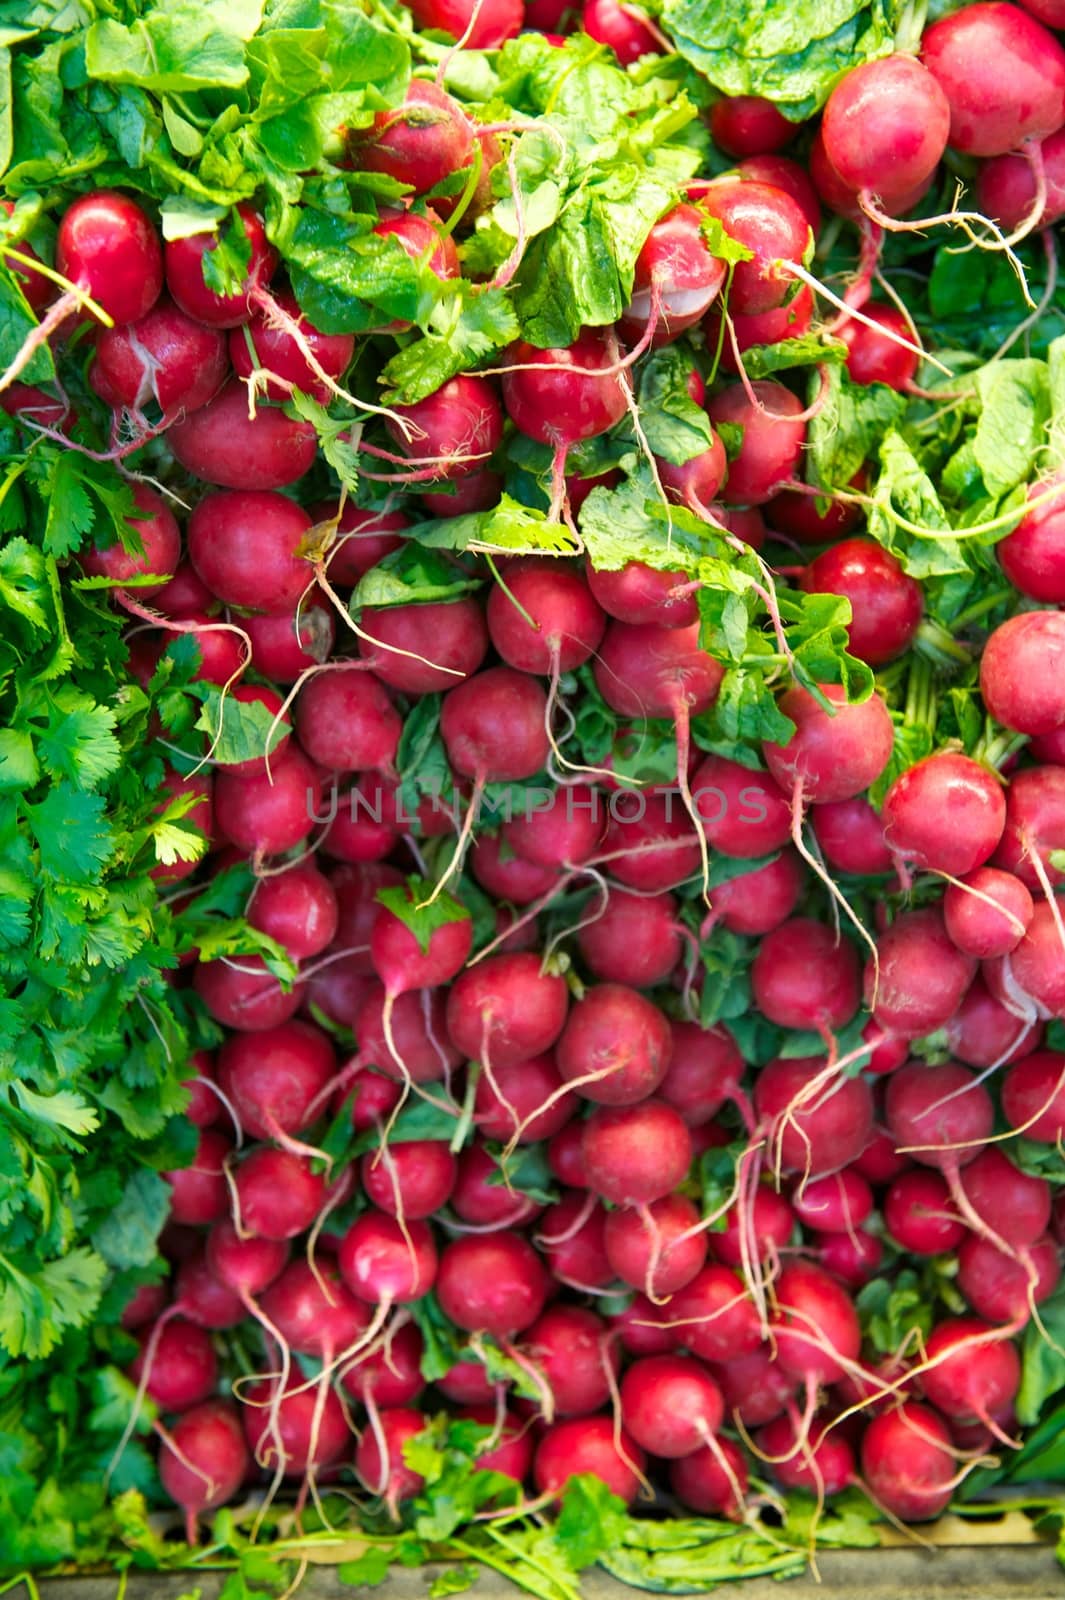 Stack of red radishes with green leaves in a grocery store's produce department